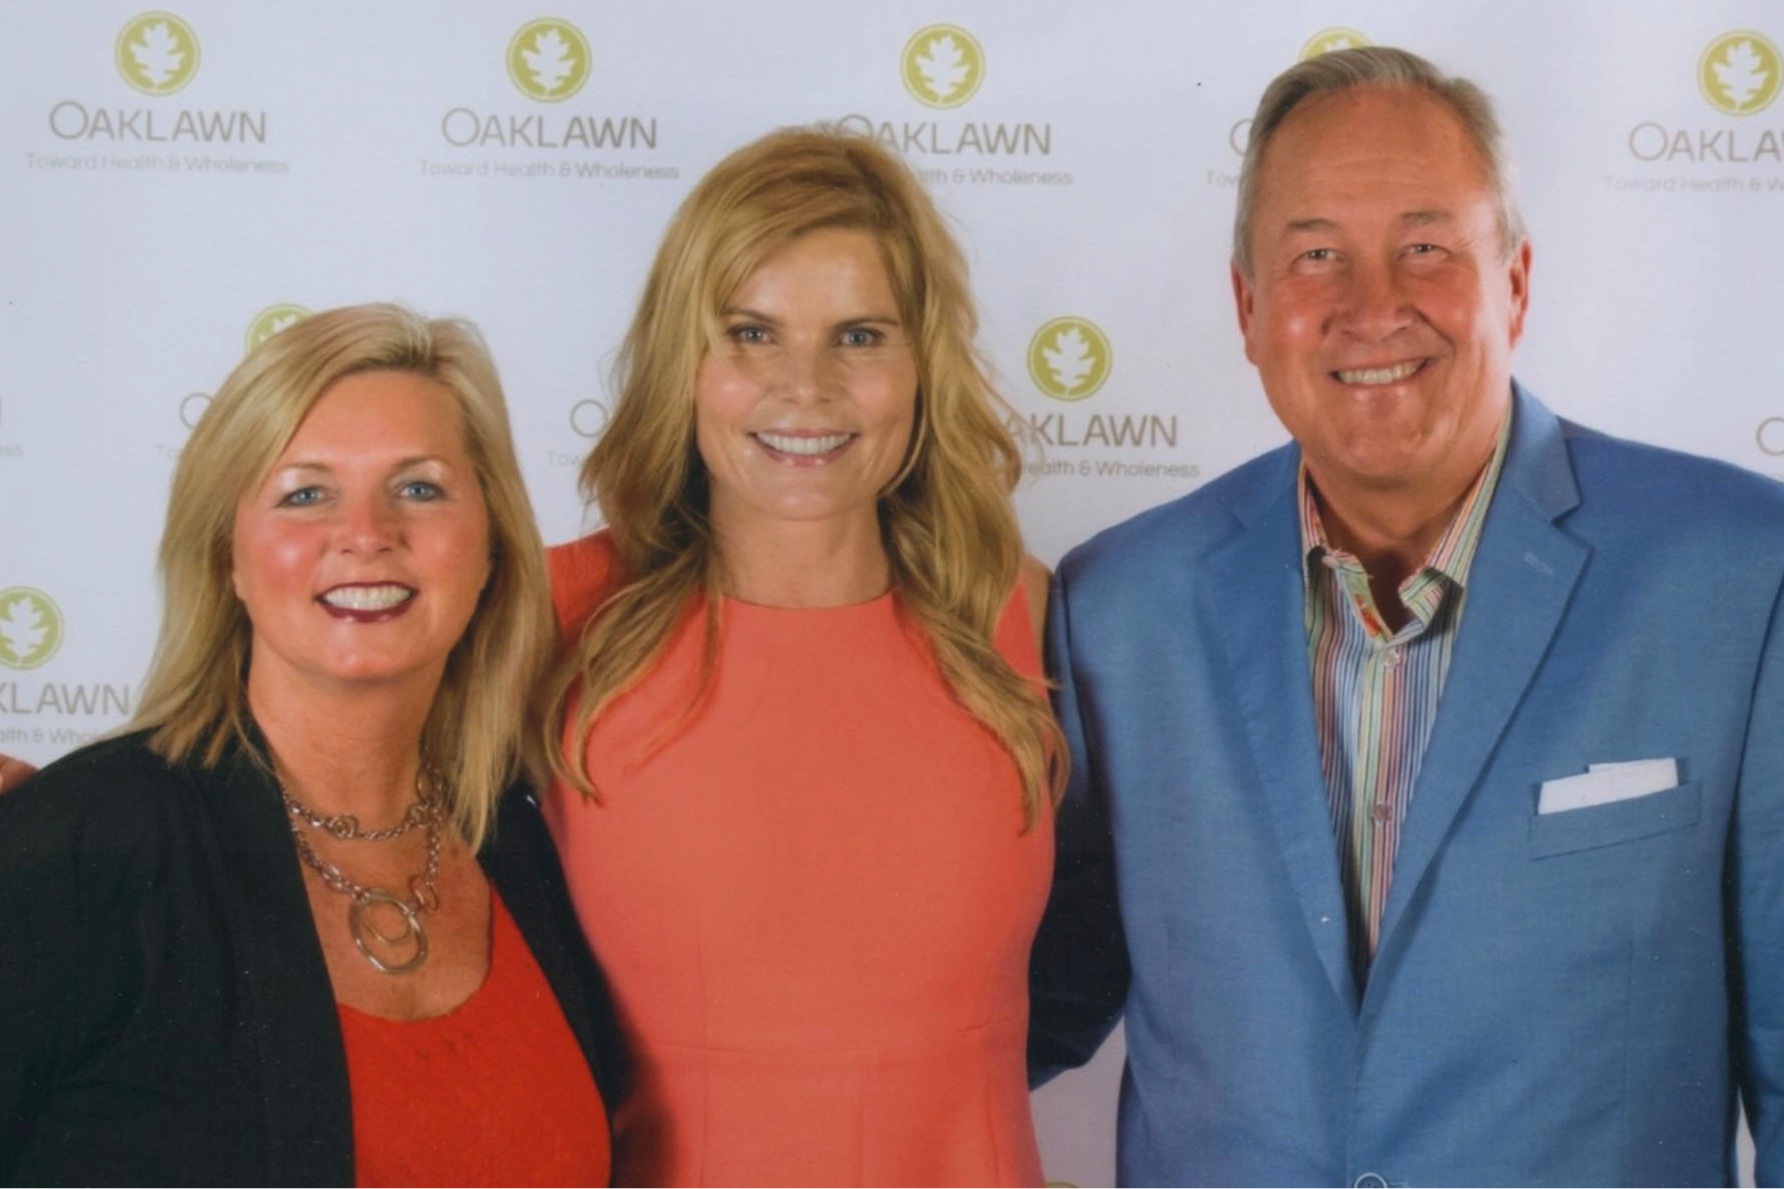 Enjoying an evening with Dena and Mariel Hemingway at Oaklawn's Annual Spring Spectacular event at The Lerner.